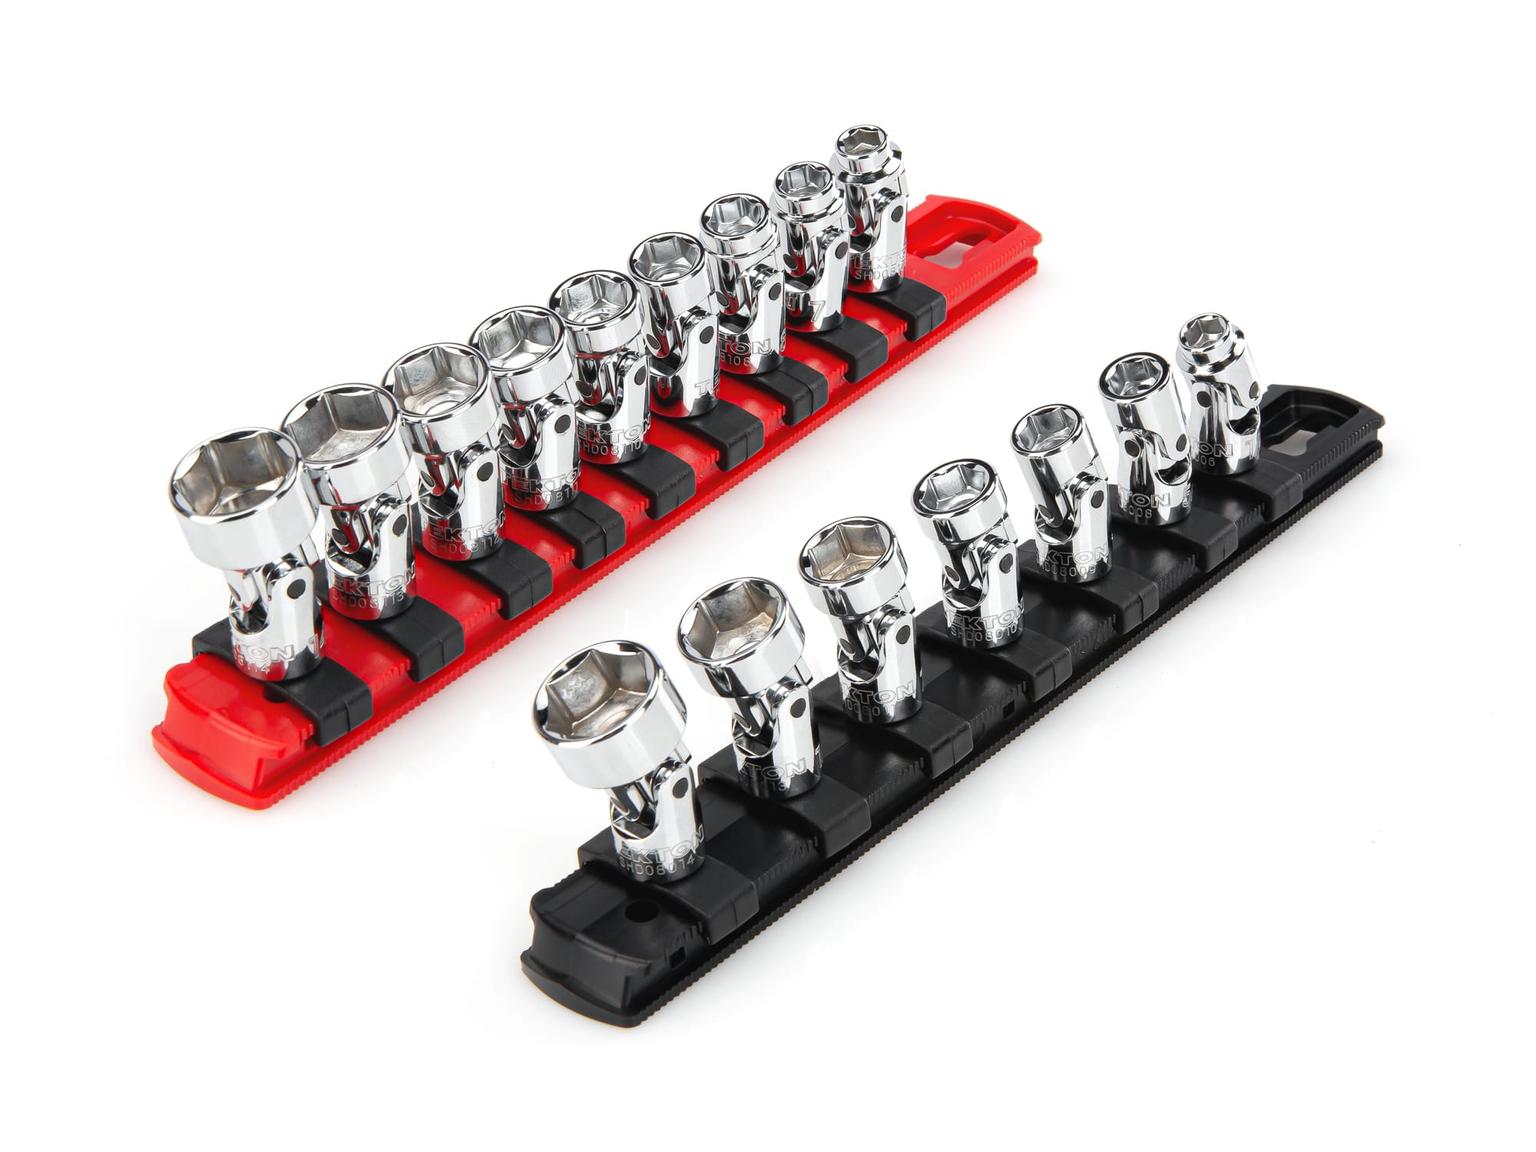 TEKTON SHD90205-T 1/4 Inch Drive Universal Joint Socket Set with Rails, 16-Piece (1/4-9/16 in., 6-14 mm)